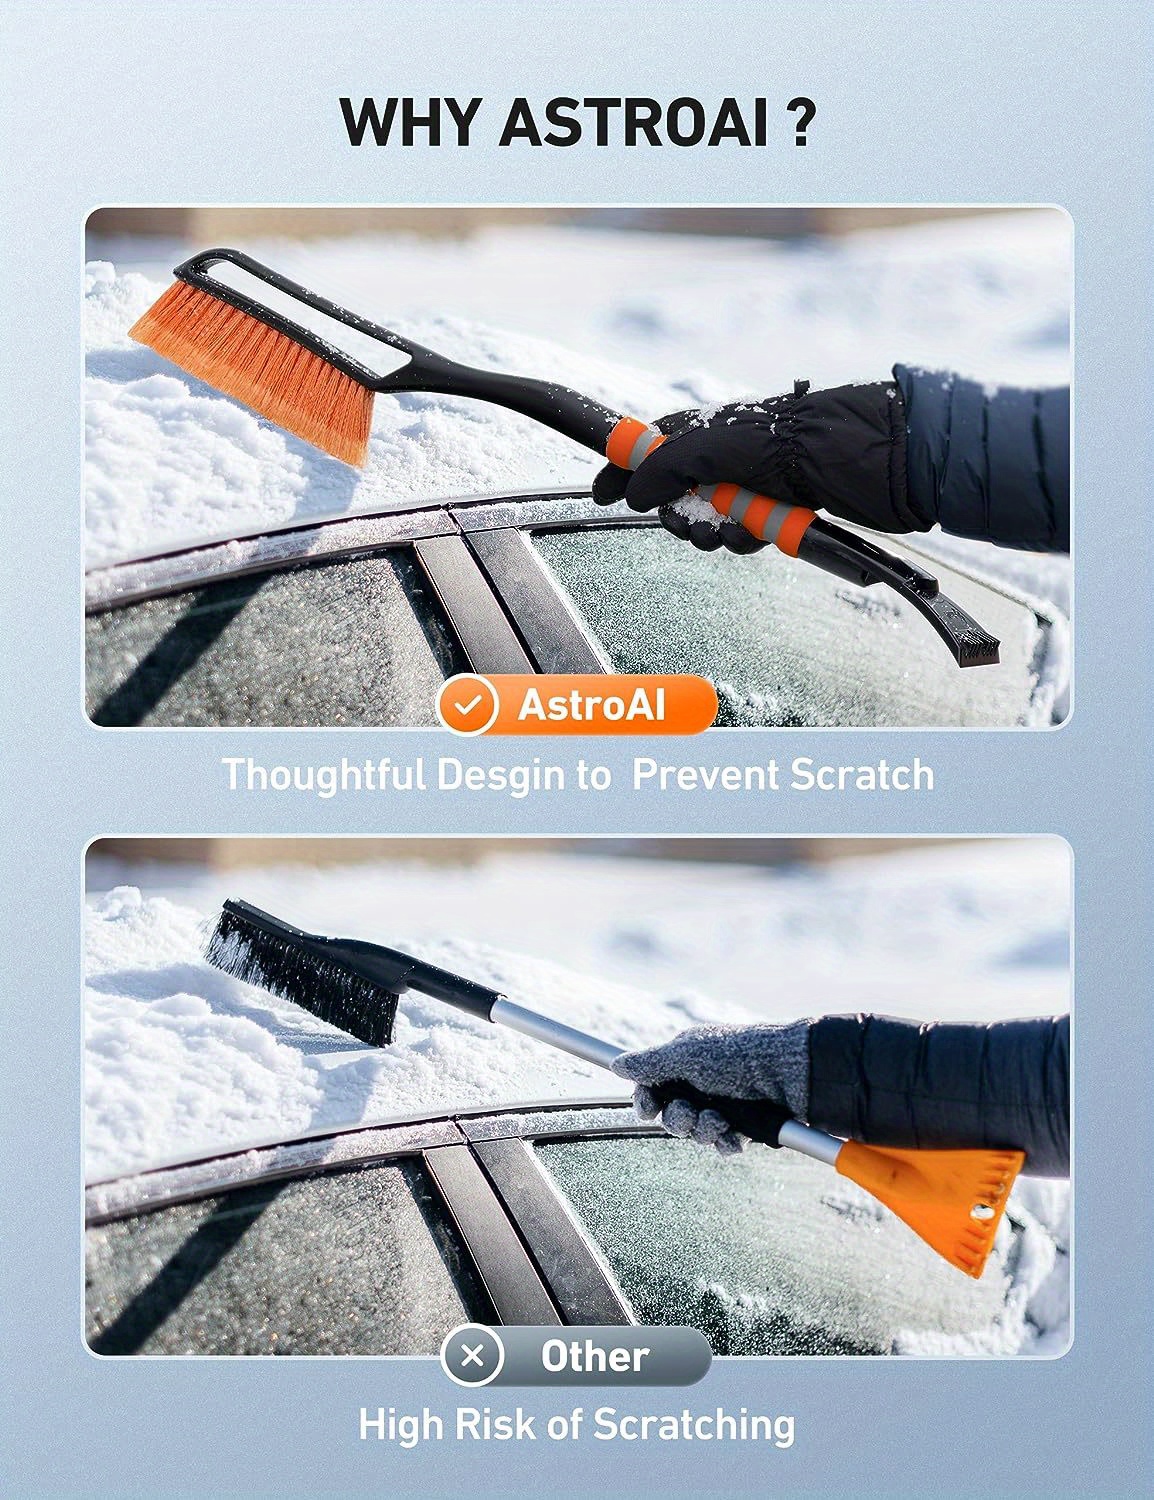 1pc Ice Scraper & Snow Brush For Car Windshield, Multi-functional, Winter  Defrosting & Snow Removal Tool